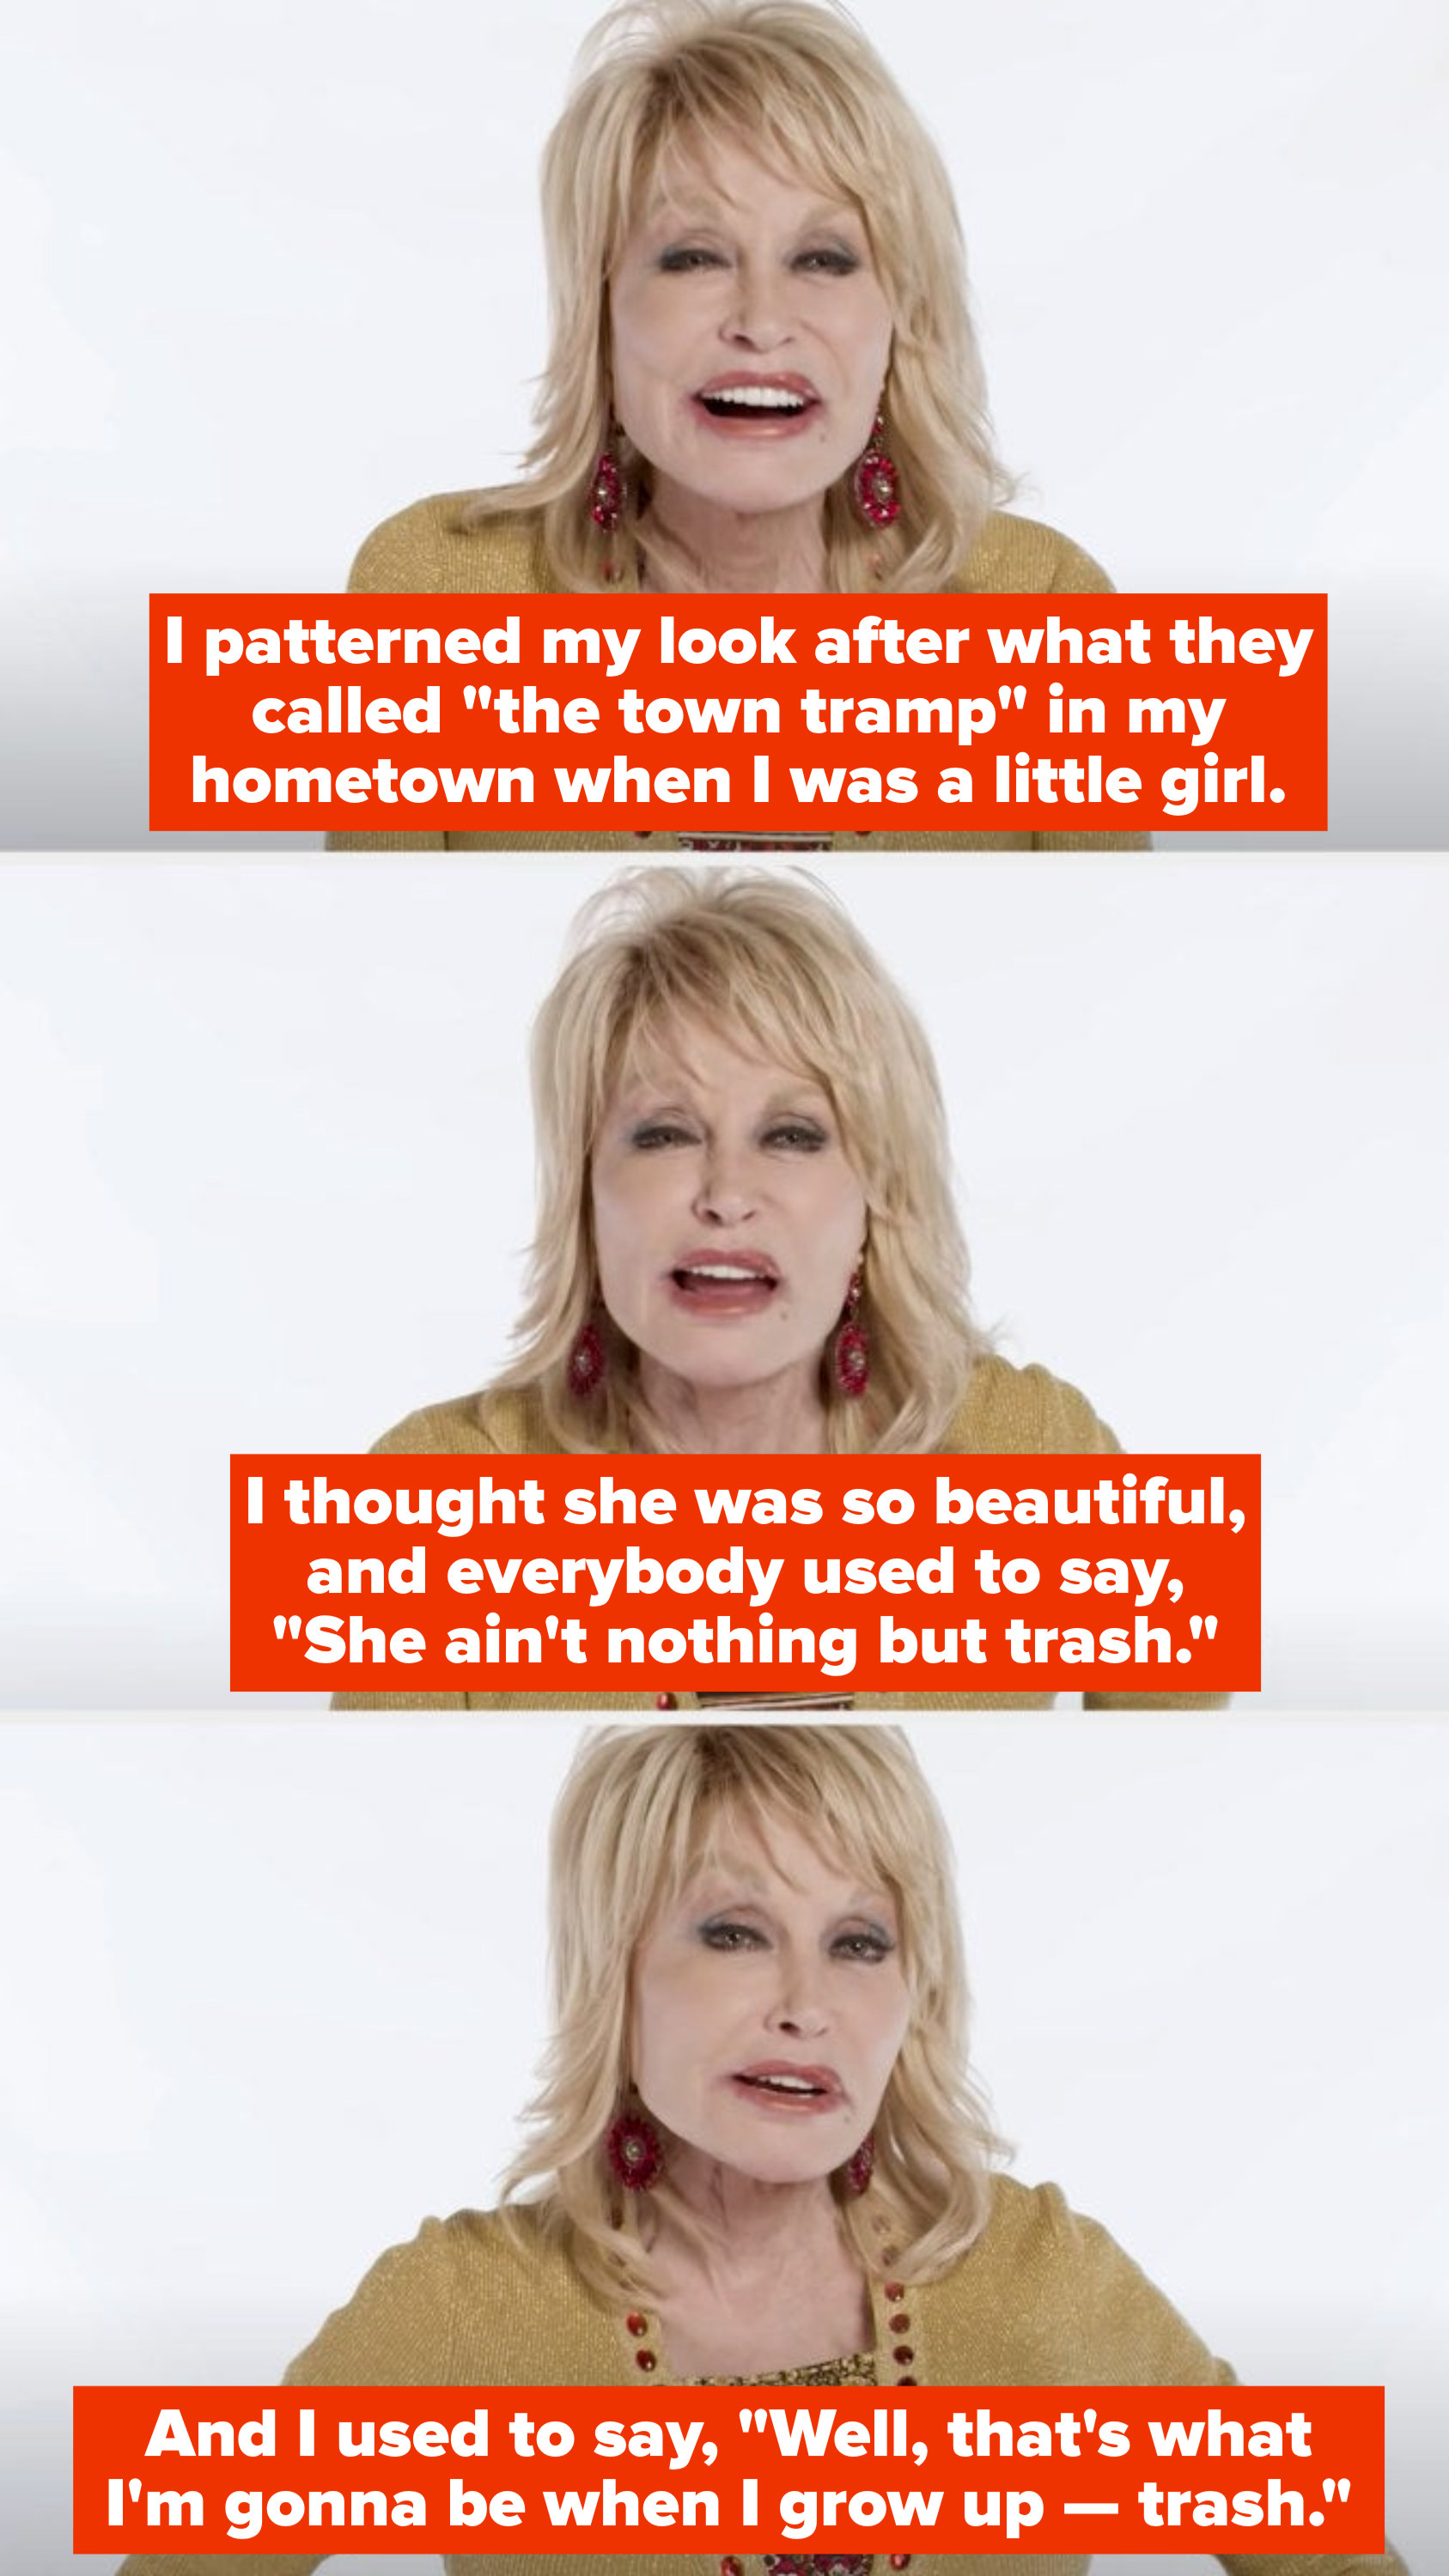 Dolly: &quot;I thought she was so beautiful, and everybody used to say &#x27;She ain&#x27;t nothing but trash.&#x27; And I used to say: &#x27;Well, that&#x27;s what I&#x27;m gonna be when I grow up -- trash&quot;